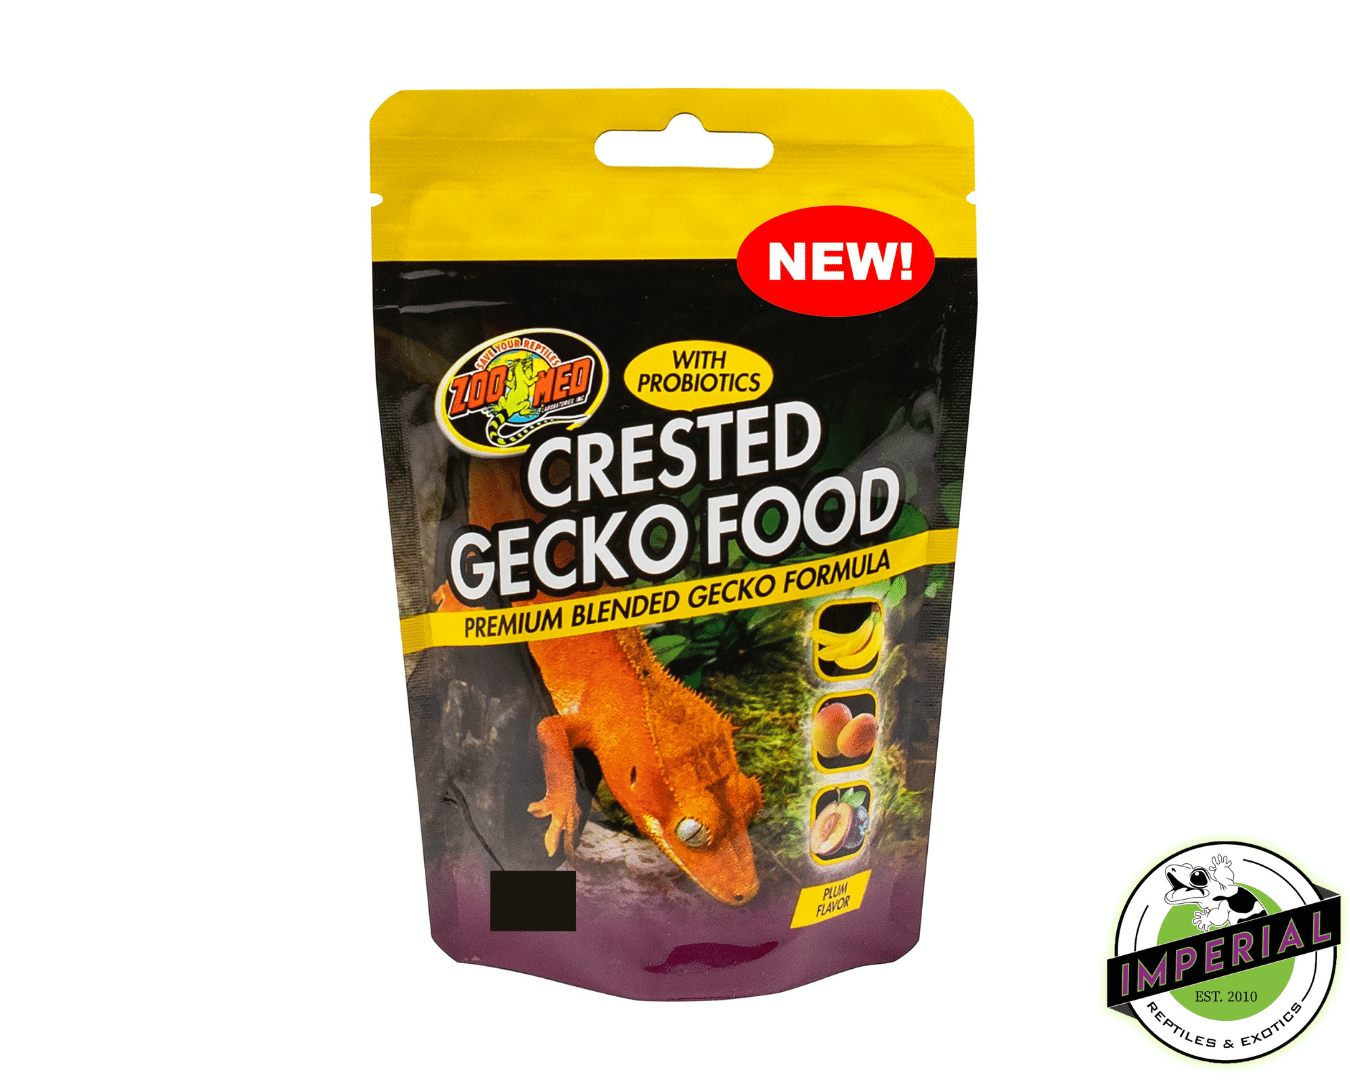 gecko diet for sale online, buy reptile supplies near me at cheap prices